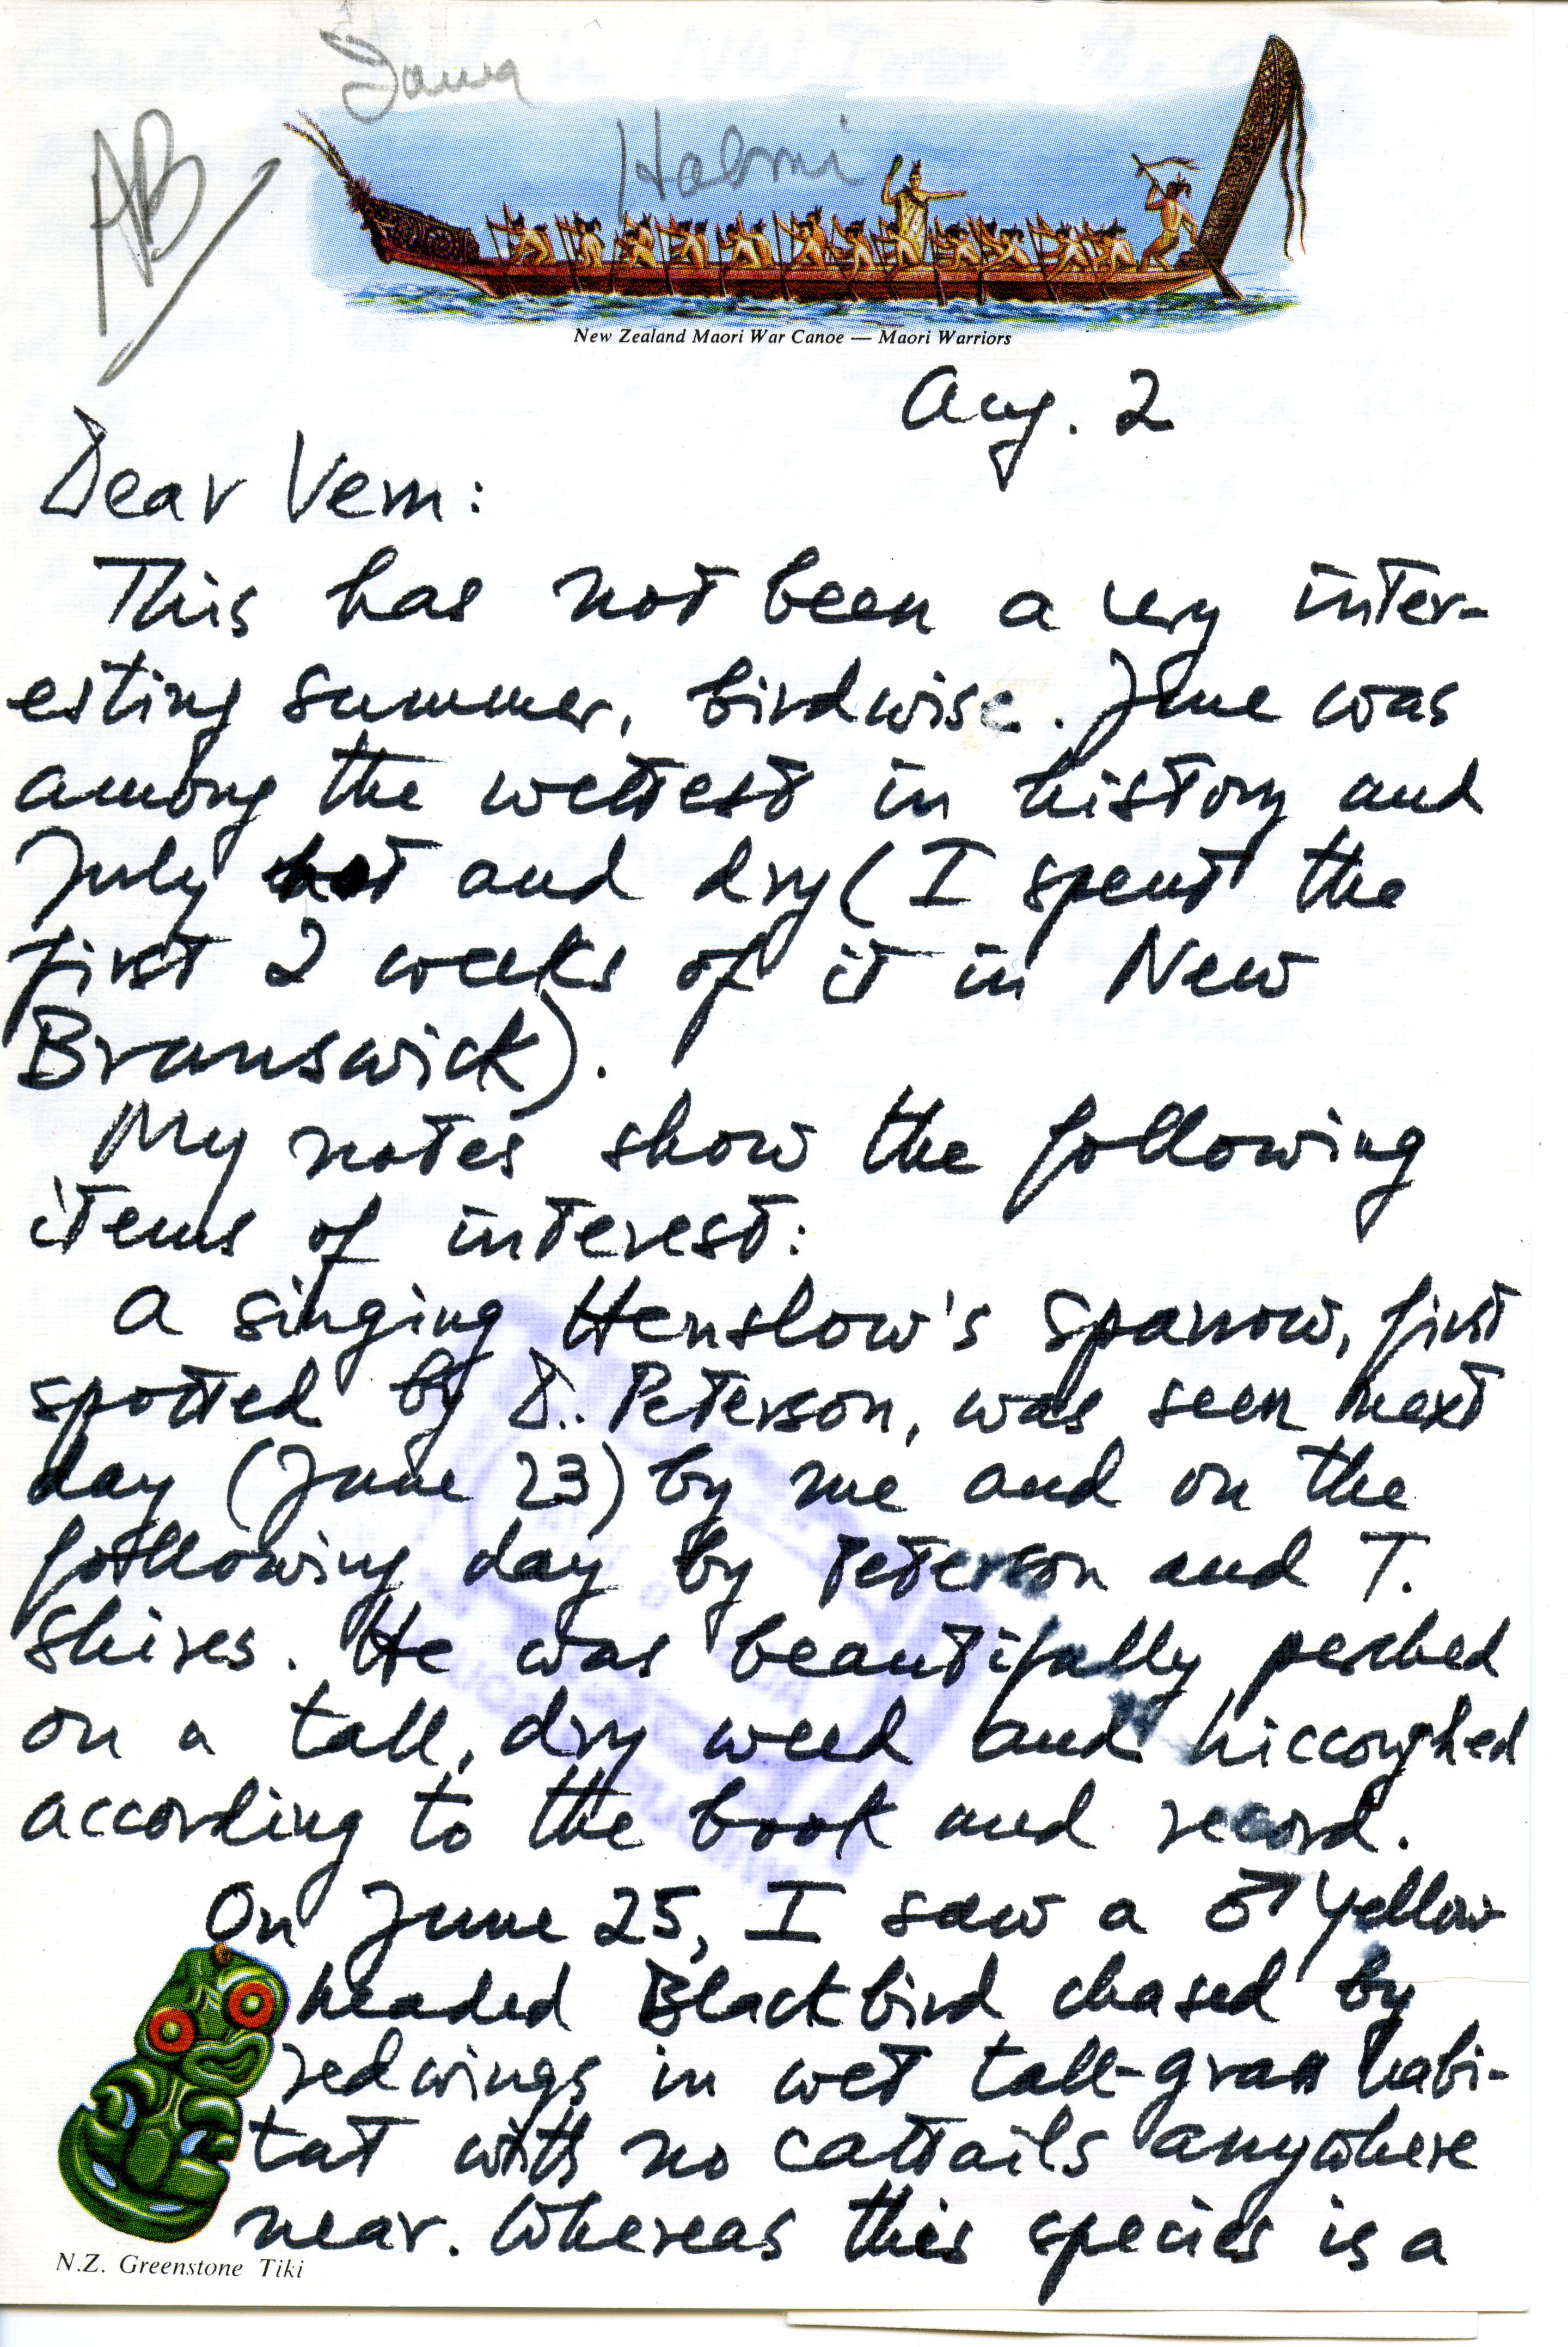 Nicholas S. Halmi letter to Vernon M. Kleen reporting summer sightings, August 2, 1974